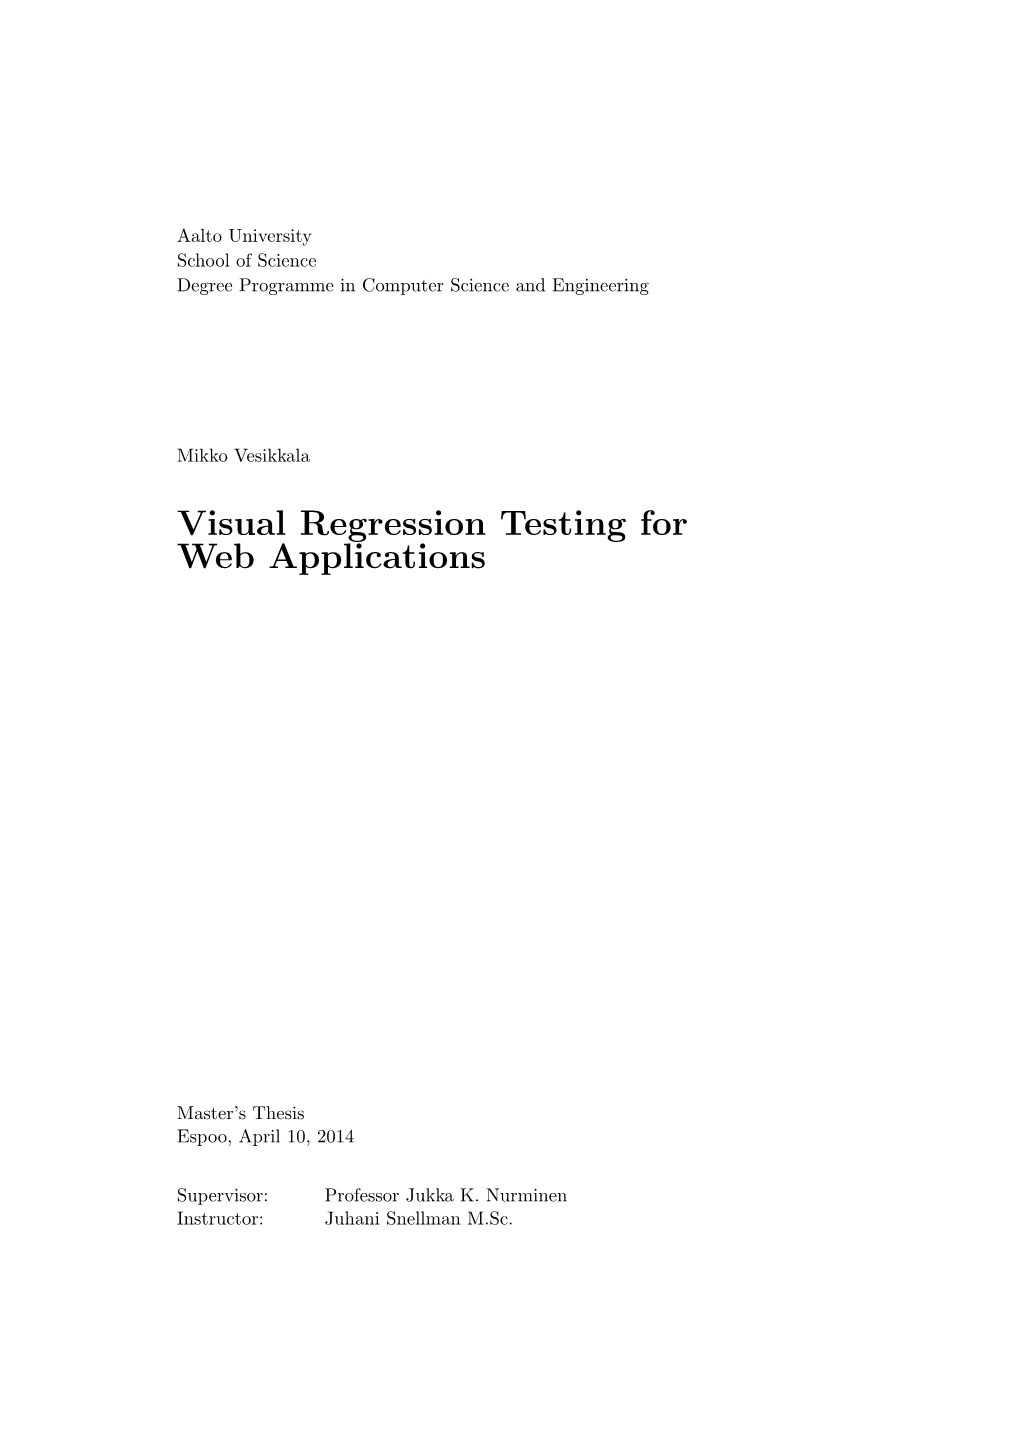 Visual Regression Testing for Web Applications